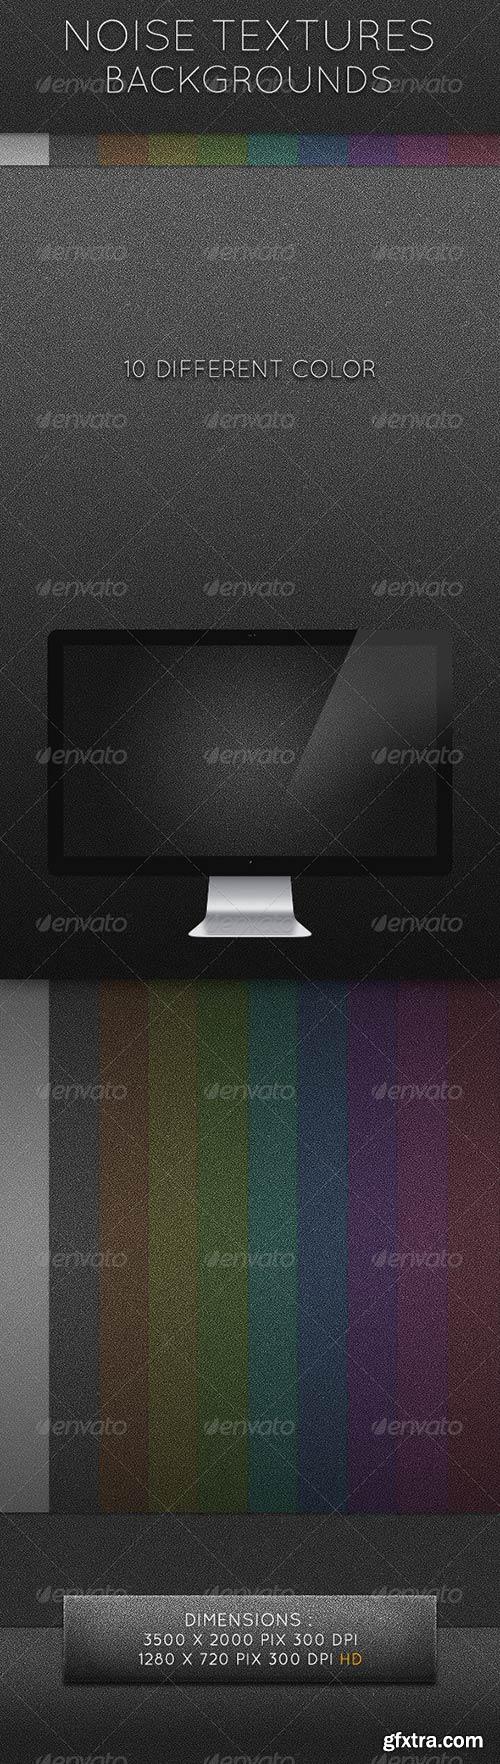 GraphicRiver - Noise Textures Background